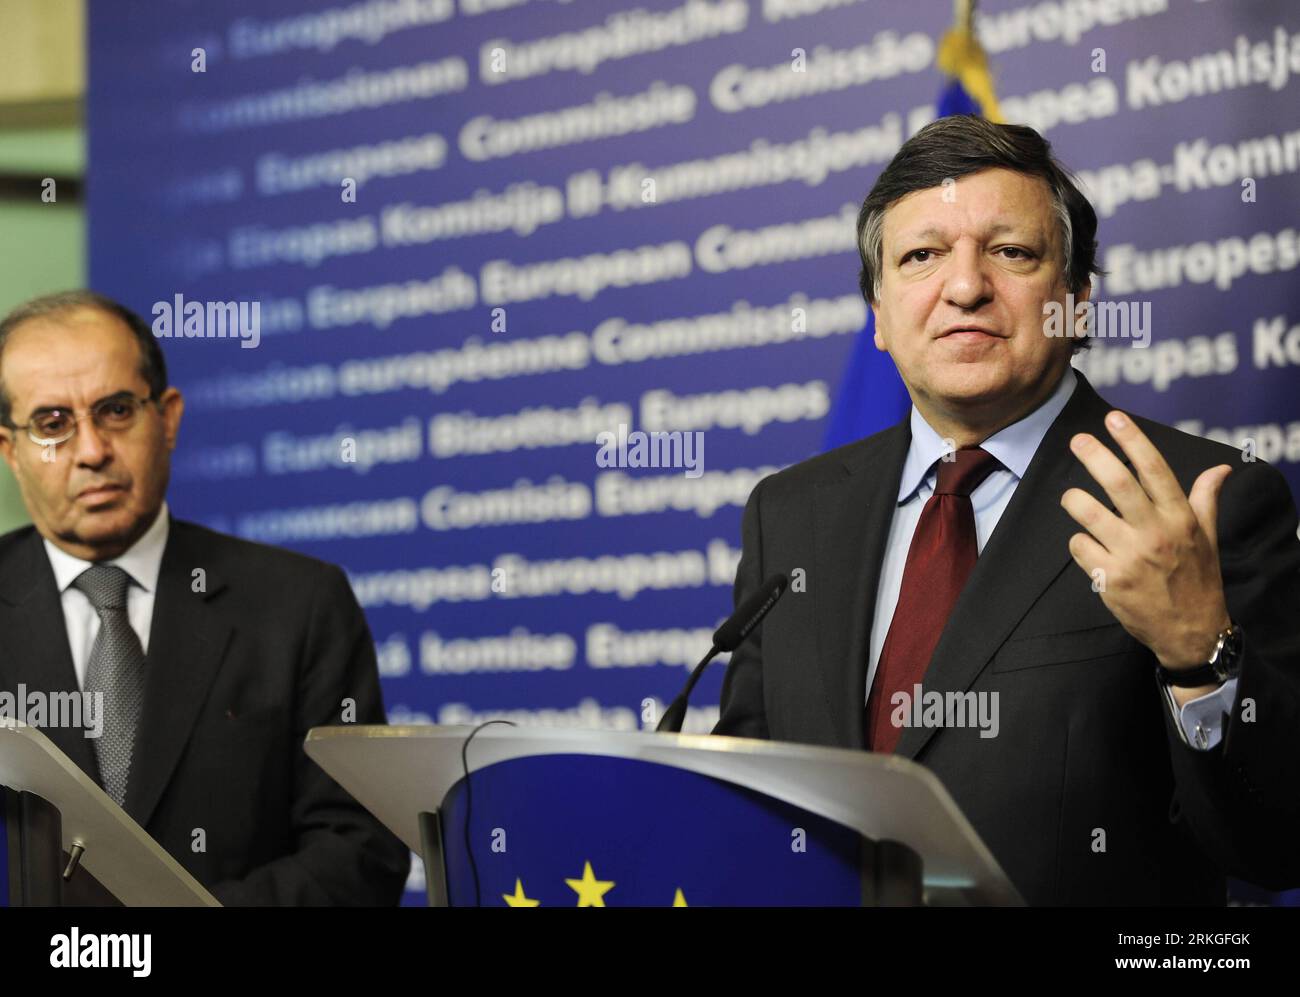 Bildnummer: 55590600  Datum: 13.07.2011  Copyright: imago/Xinhua (110713) -- BRUSSELS, July 13, 2011 (Xinhua) -- European Commission President Jose Manuel Barroso(R) speaks as Chairman of the Executive Board of the National Transitional Council of Libya Mahmoud Jibril stands beside during a press conference following a working session at EU headquarters in Brussels, July 13, 2011. (Xinhua/Yu Yang)(yy) (4)BELGIUM-BRUSSELS-EU-LIBYA-PRESS CONFERENCE PUBLICATIONxNOTxINxCHN People Politik xjh x0x 2011 quer     Bildnummer 55590600 Date 13 07 2011 Copyright Imago XINHUA  Brussels July 13 2011 XINHUA Stock Photo